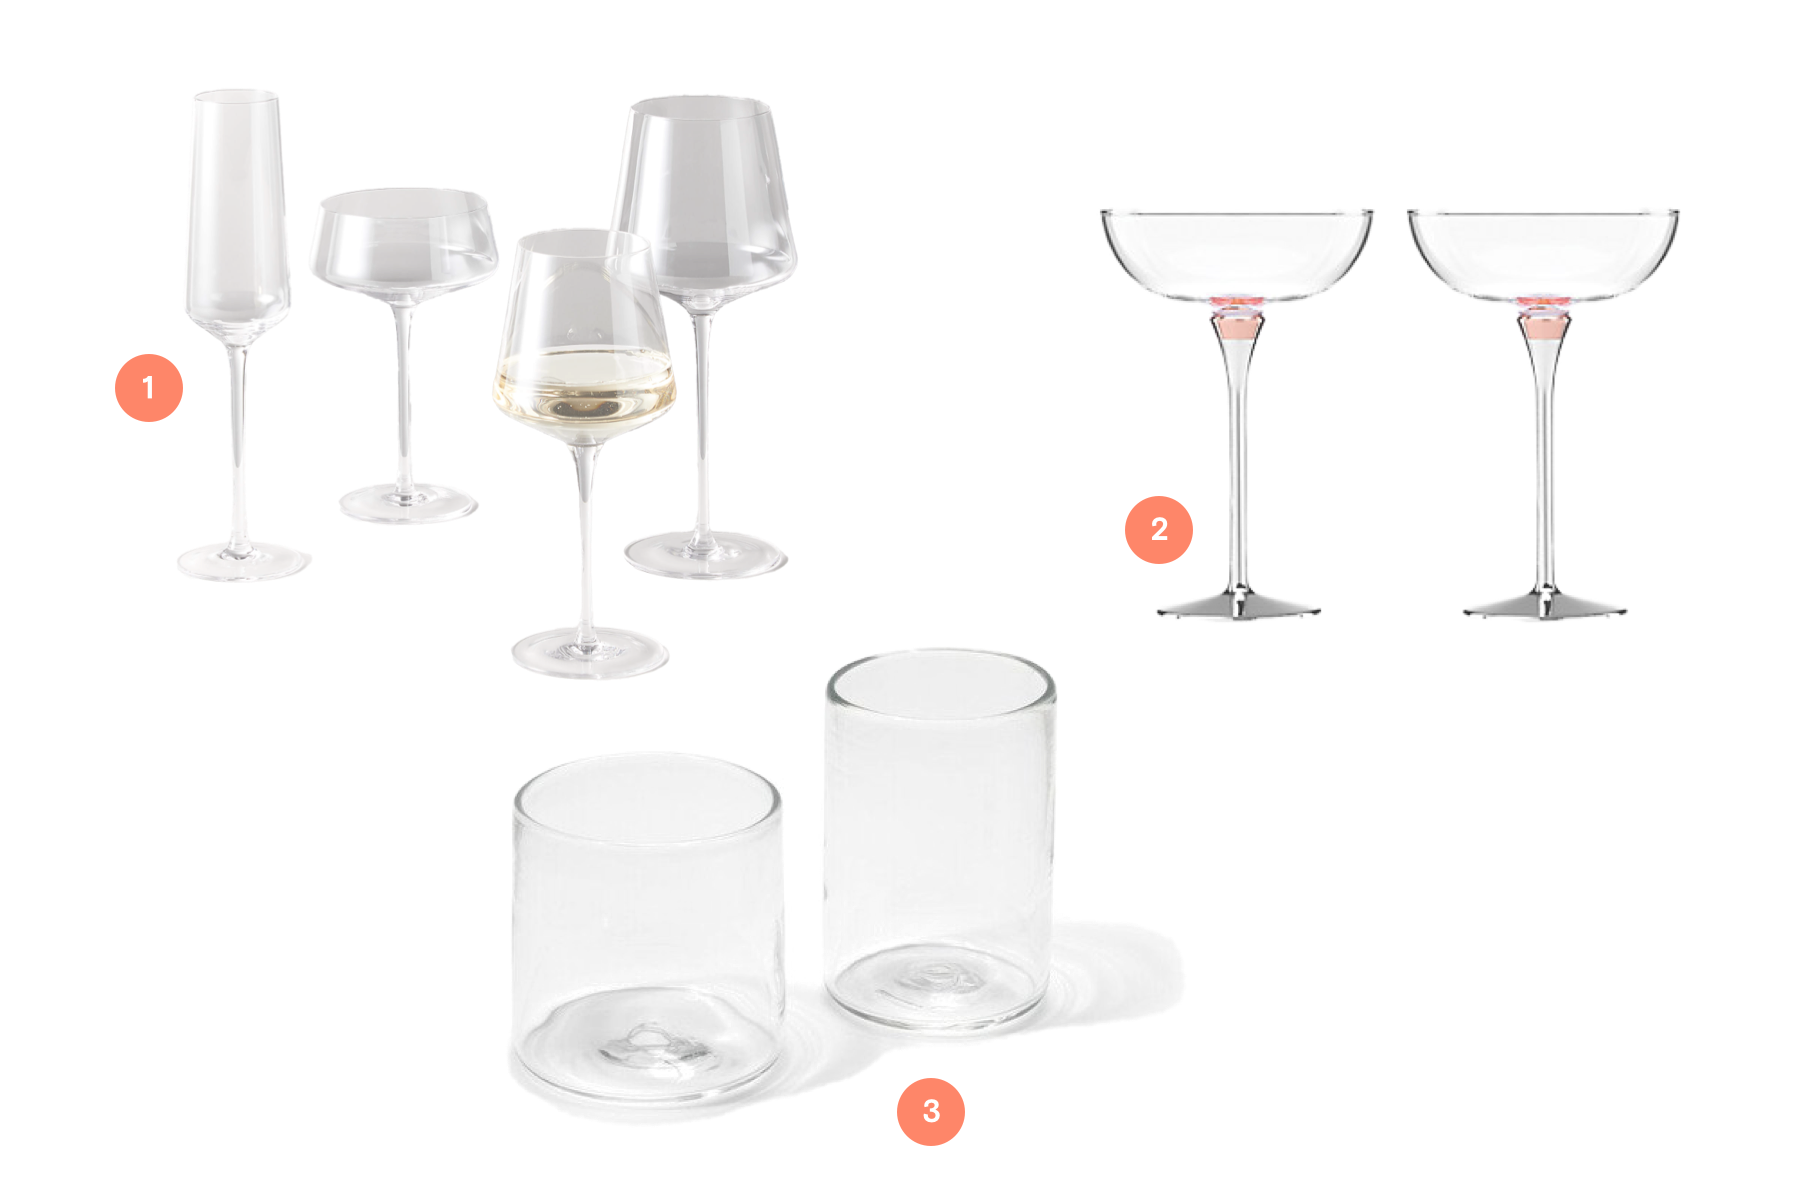 Three types of stemware as recommended in the article.